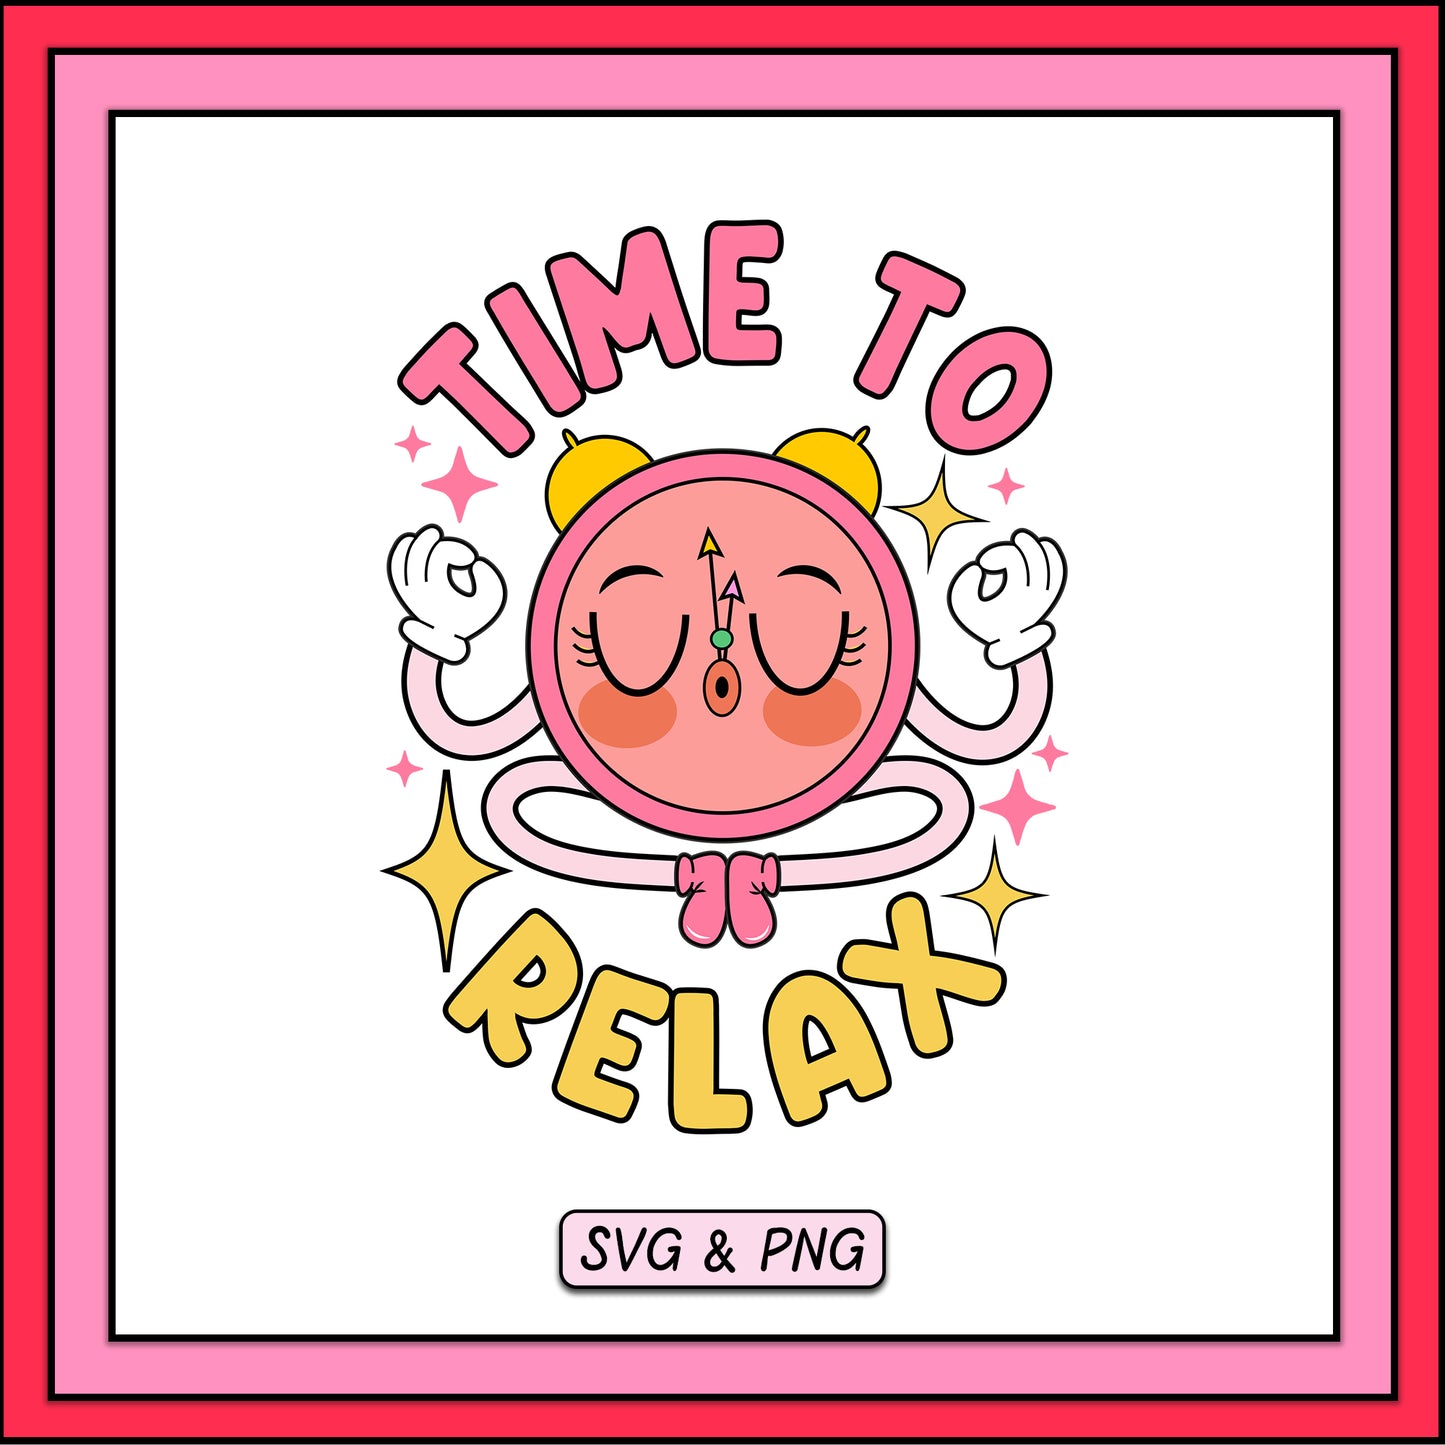 Time To Relax - SVG & PNG Design File